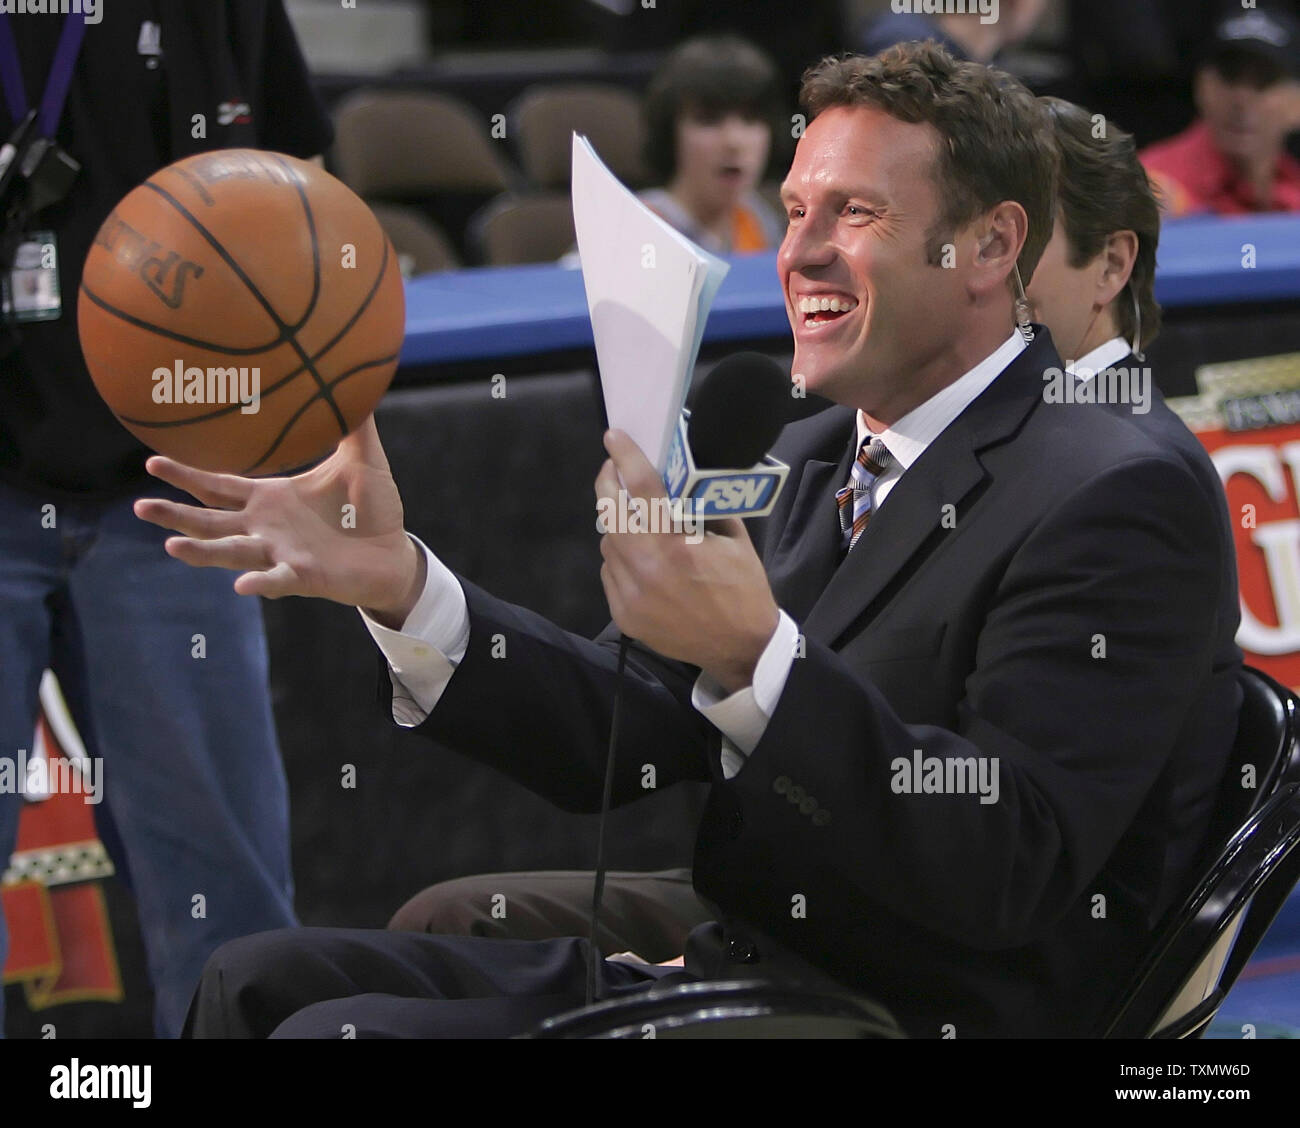 Dan Majerle of the Phoenix Suns attempts a shot against the